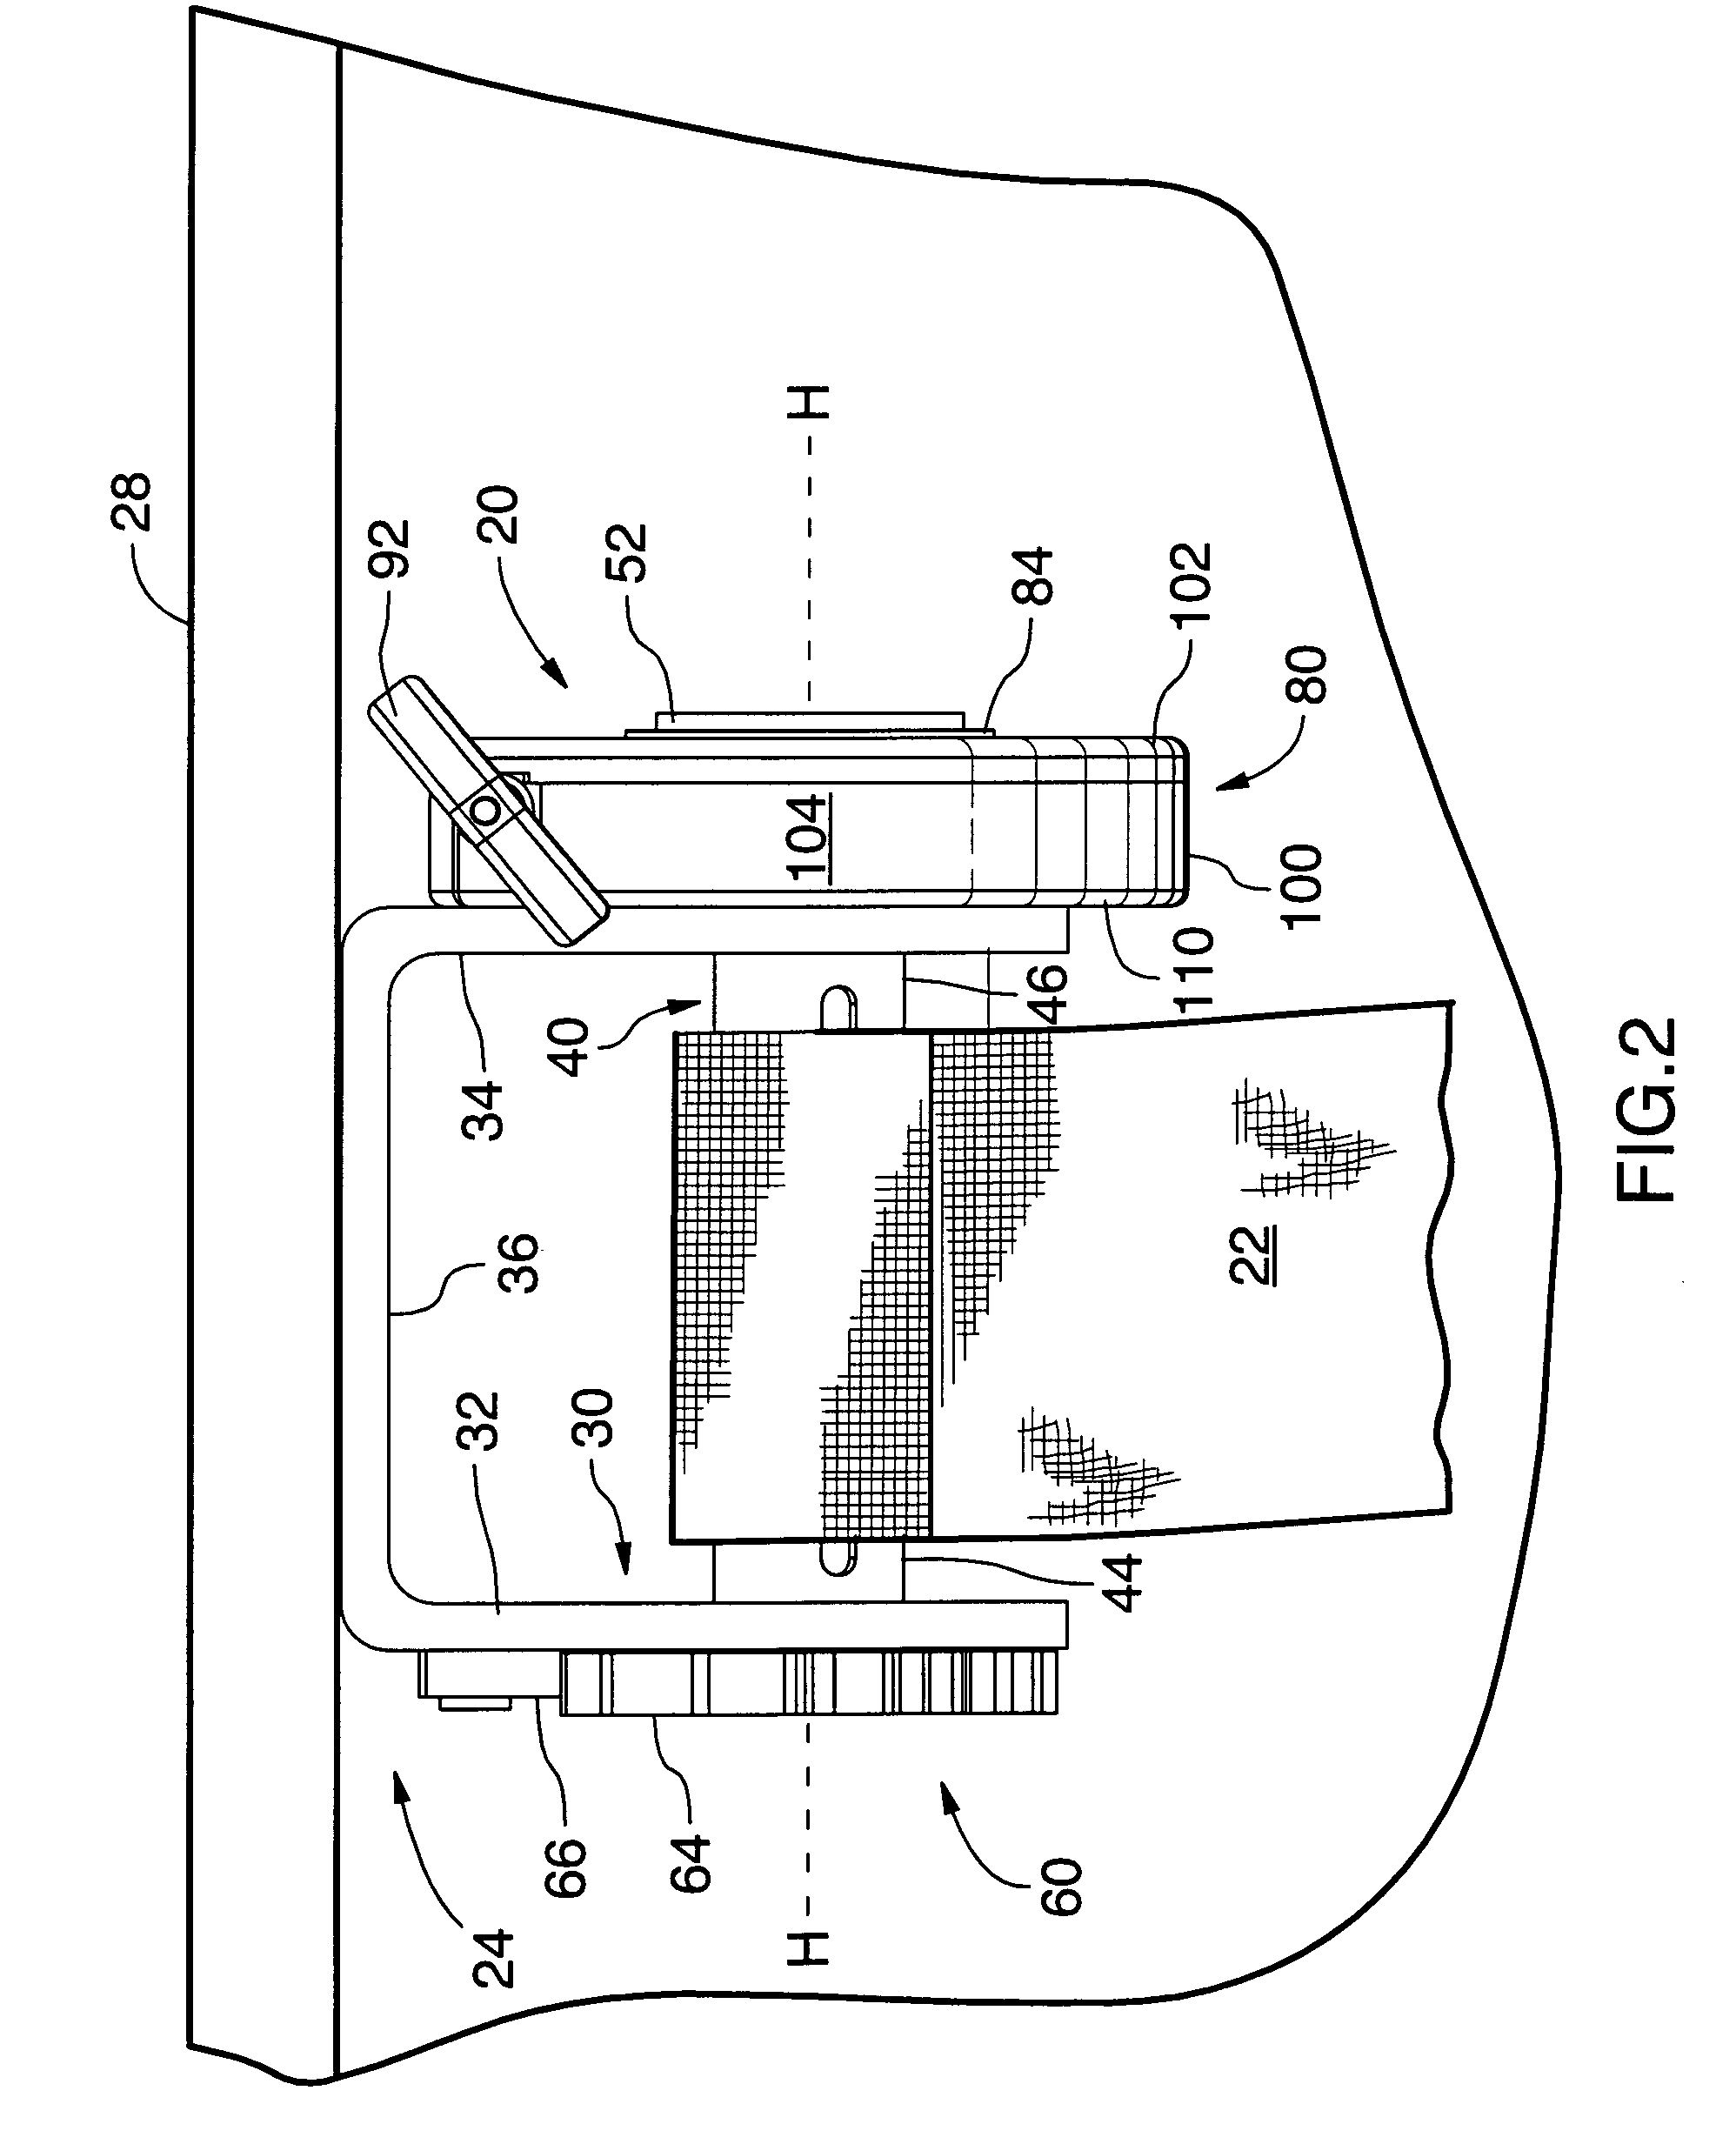 Apparatus for winding an elongate strap onto a winch